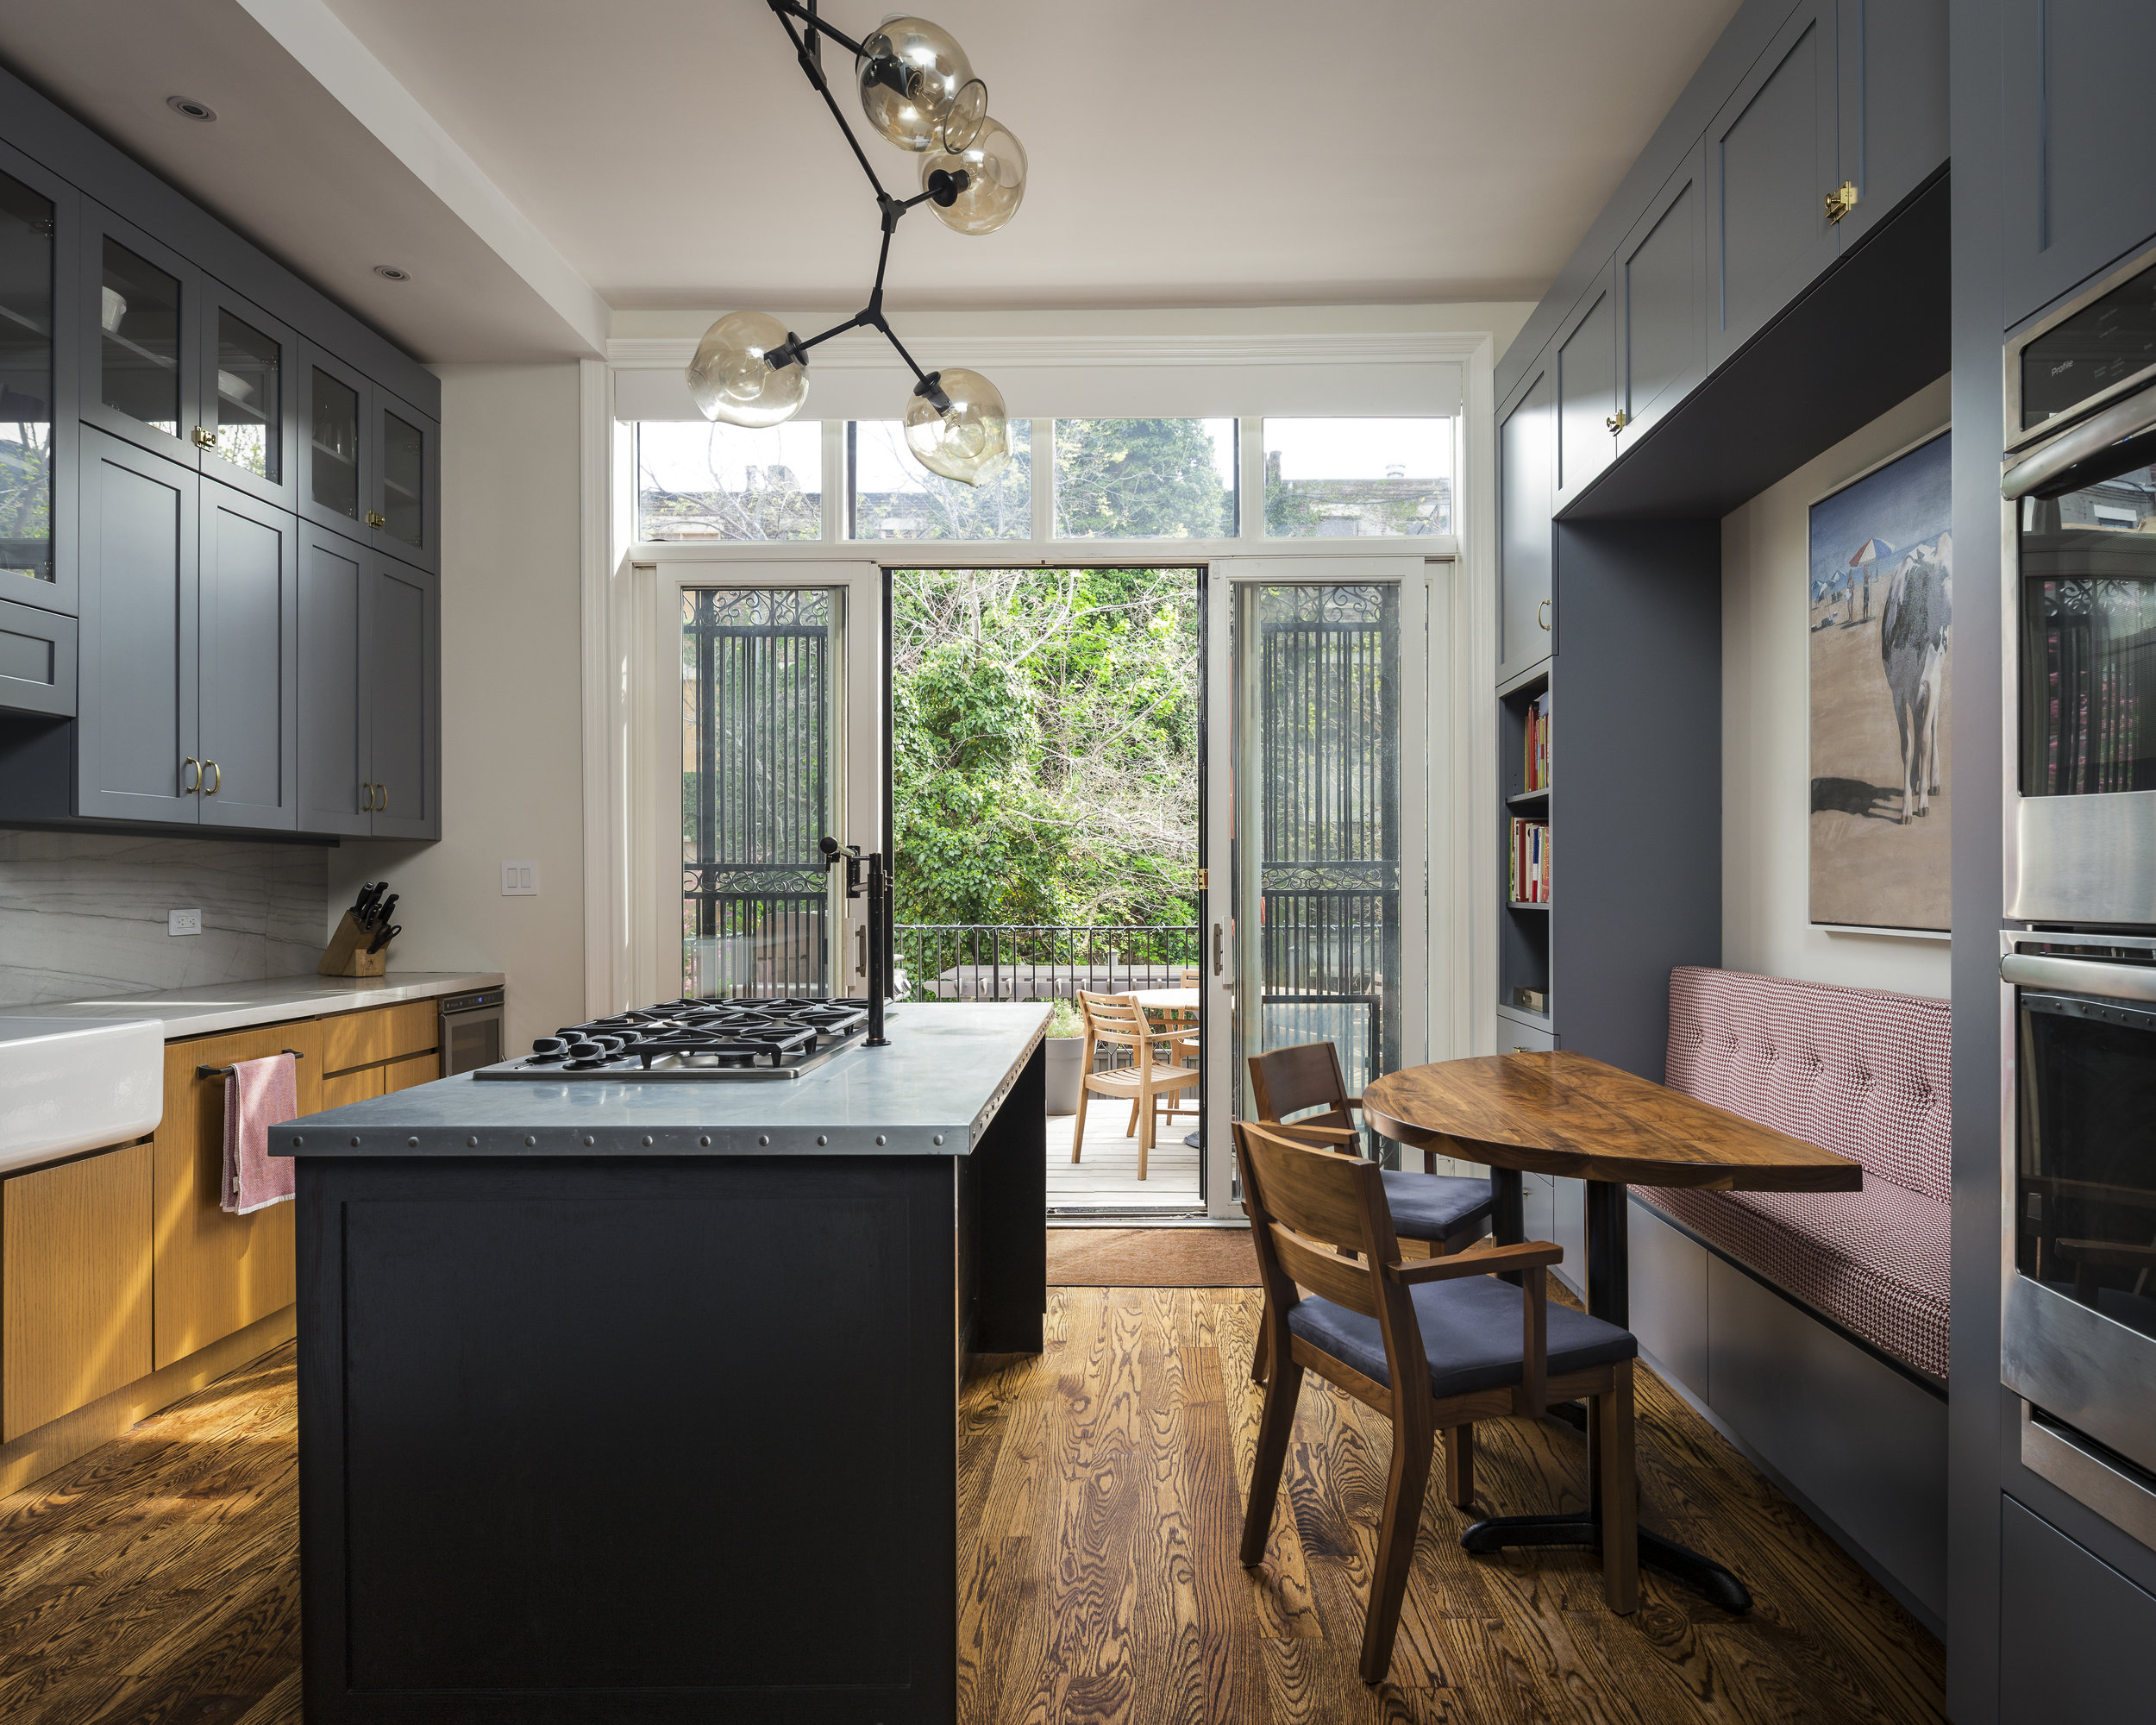 New York Architectural Photographer - Eric Soltan - Interior Projects